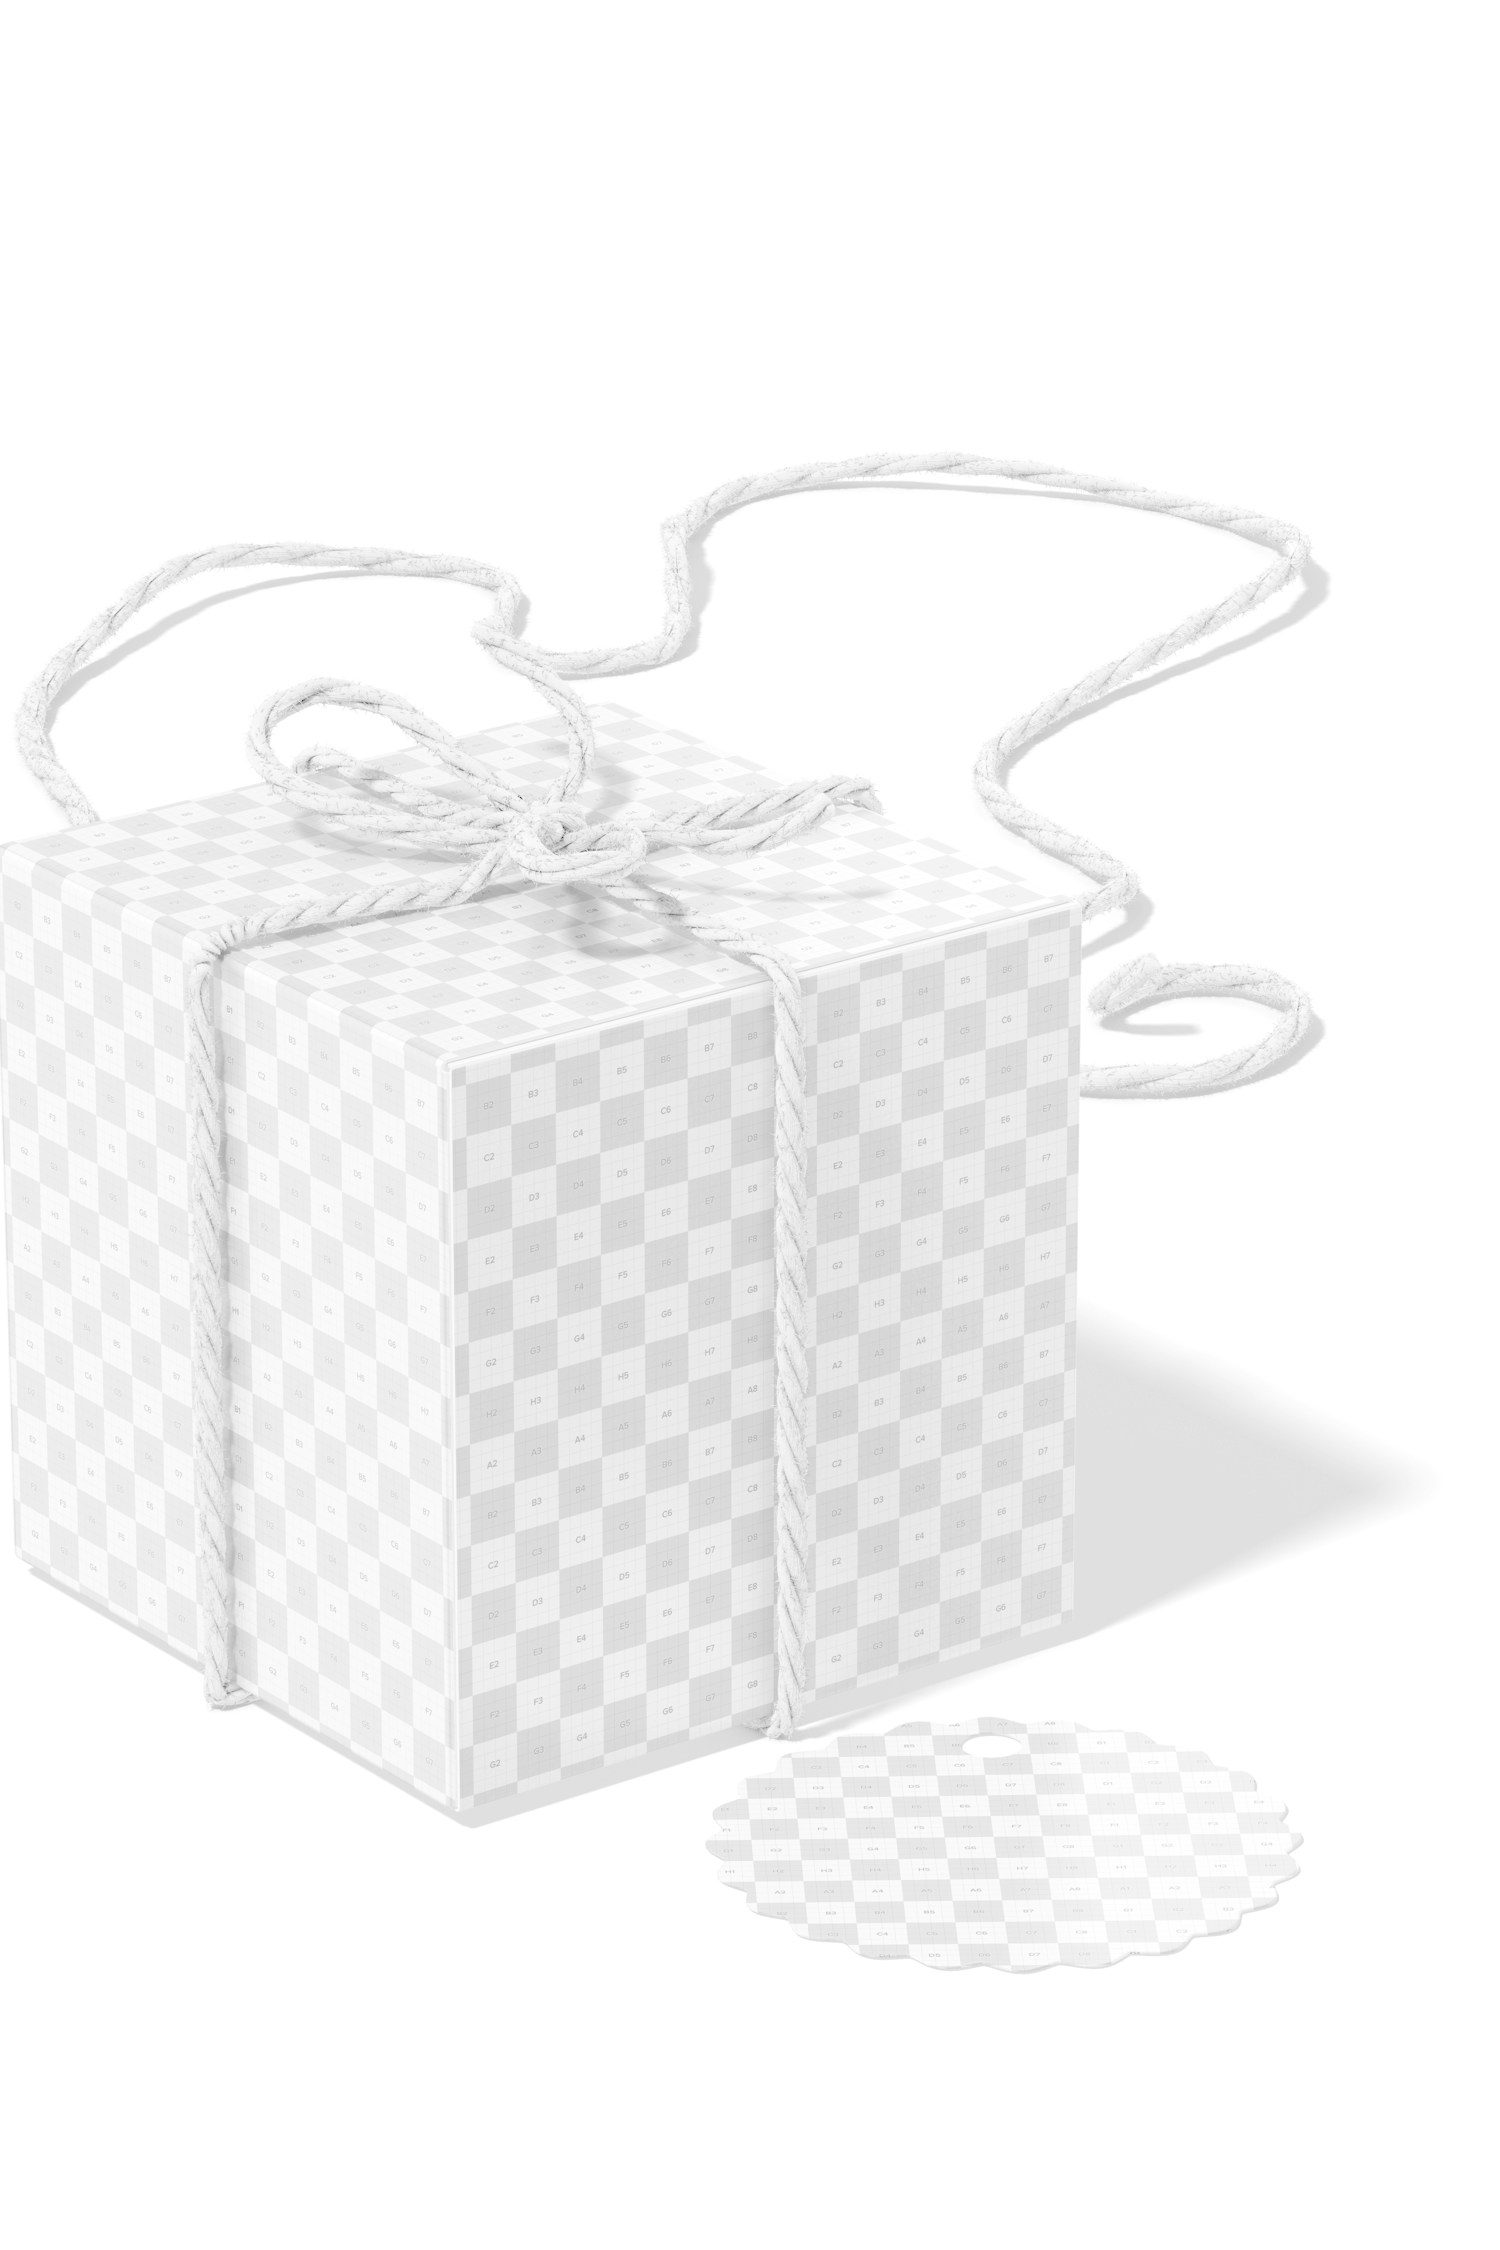 Gift Box with Label Mockup